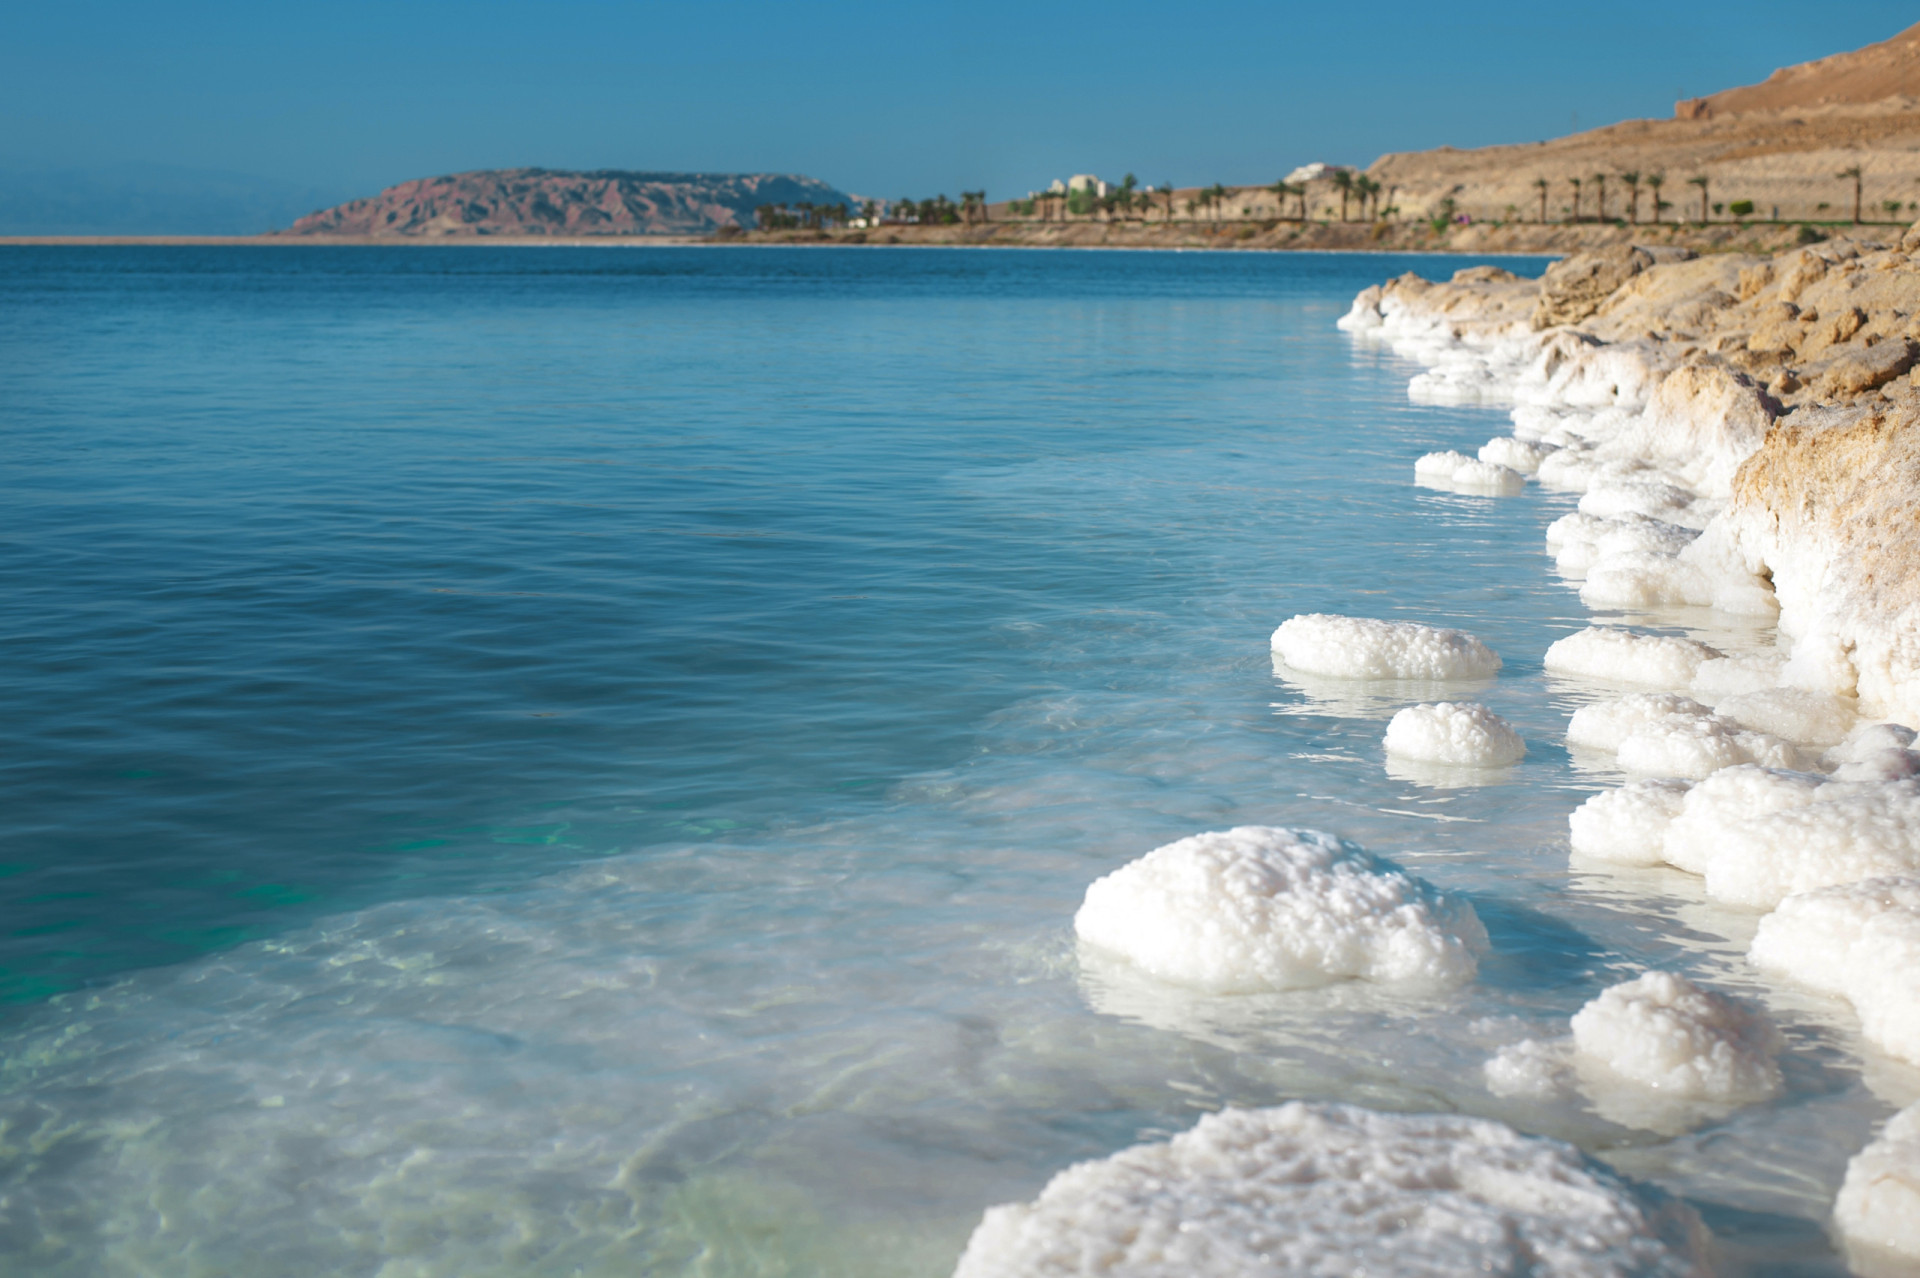 <p>The Dead Sea has been in existence for three million years. Its basin was filled by water from the Mediterranean Sea before tectonic activity lifted the land to the west, isolating it from its original water source.</p><p><a href="https://www.msn.com/en-us/community/channel/vid-7xx8mnucu55yw63we9va2gwr7uihbxwc68fxqp25x6tg4ftibpra?cvid=94631541bc0f4f89bfd59158d696ad7e">Follow us and access great exclusive content every day</a></p>